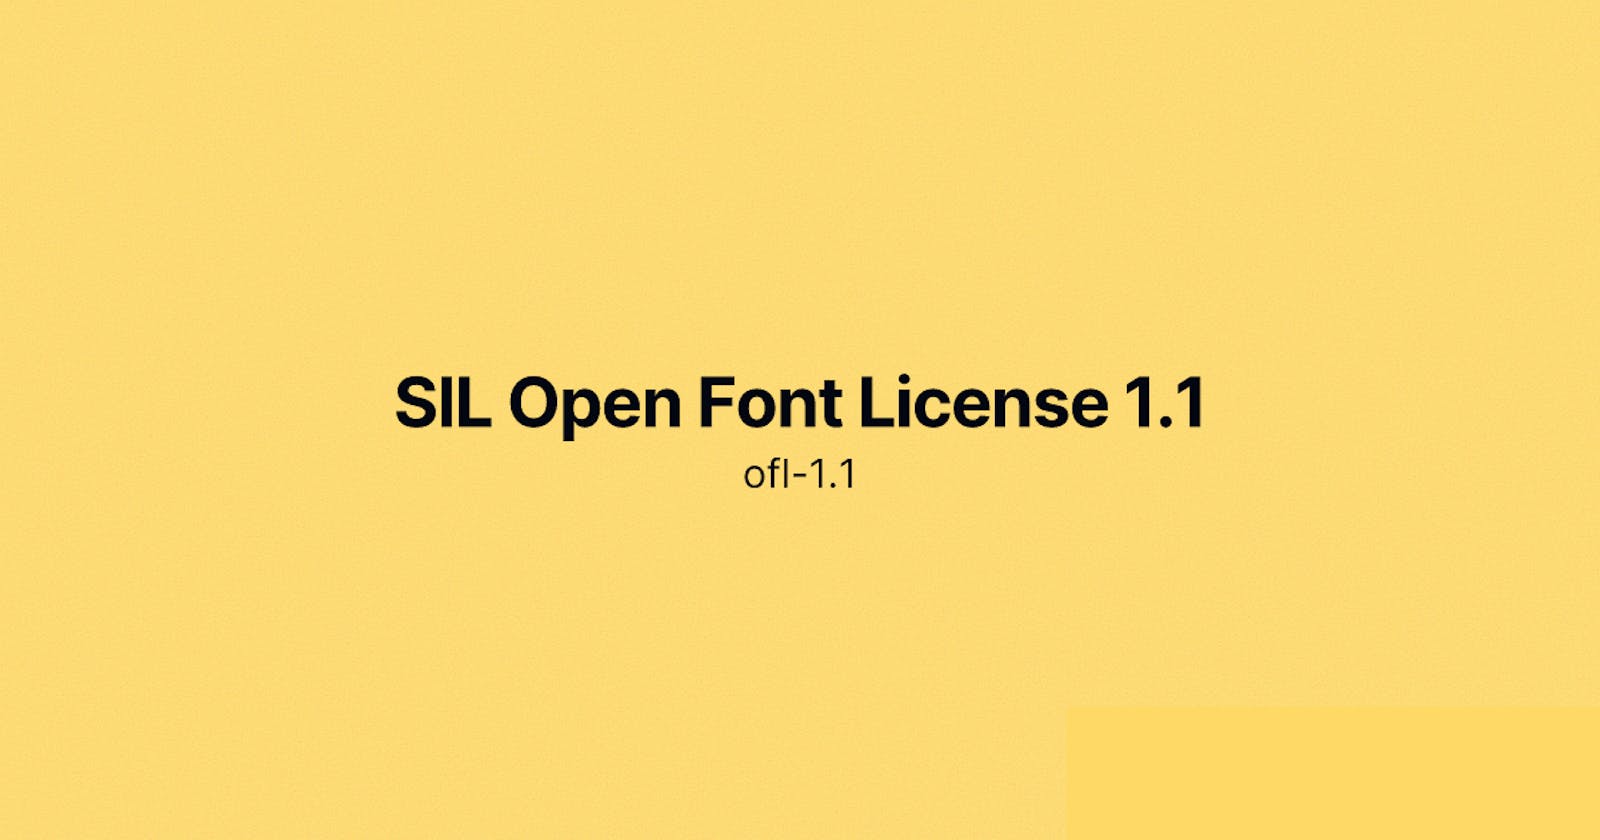 SIL Open Font License 1.1